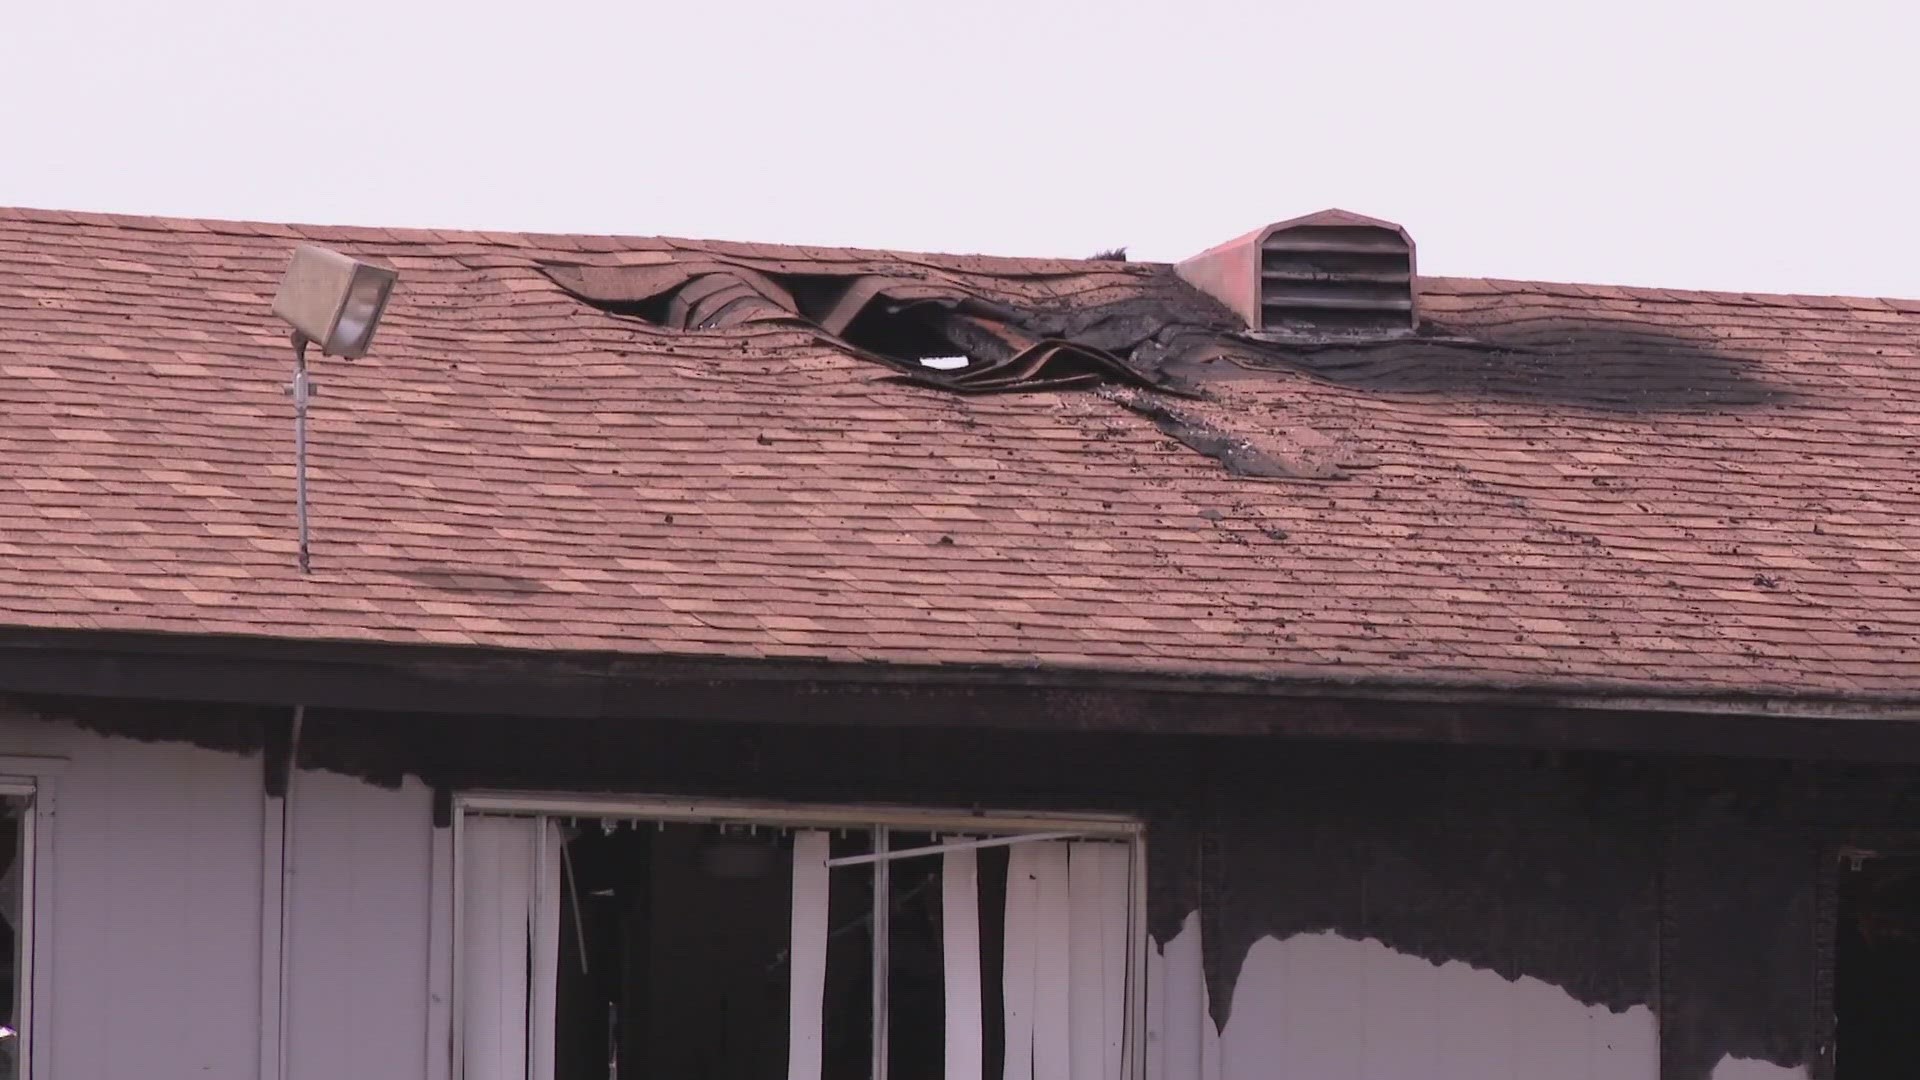 Up to 15 people are displaced after Thursday's fire in Glendale.